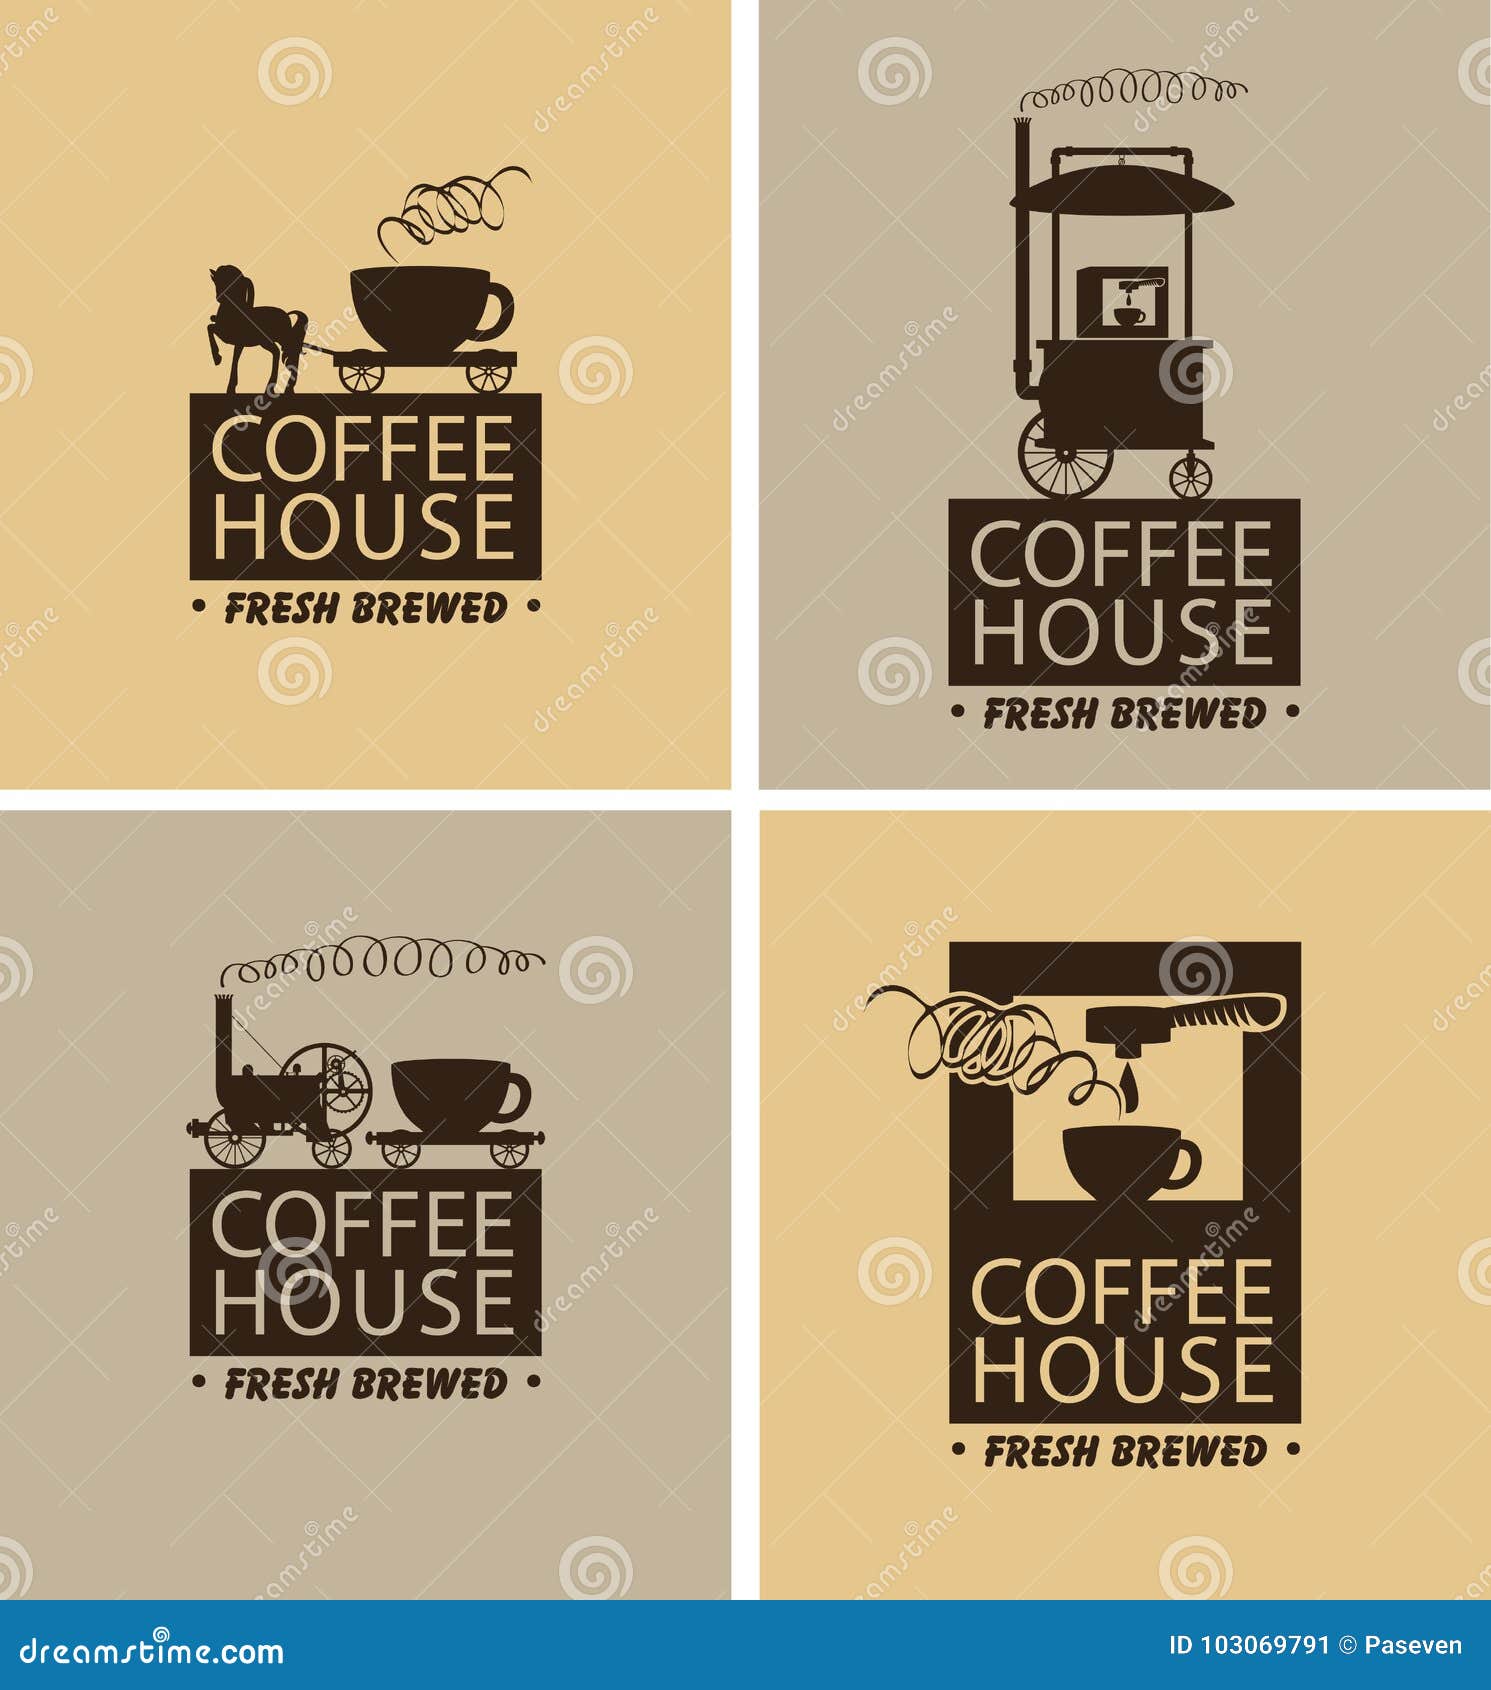  set of coffee banners for coffeehouse